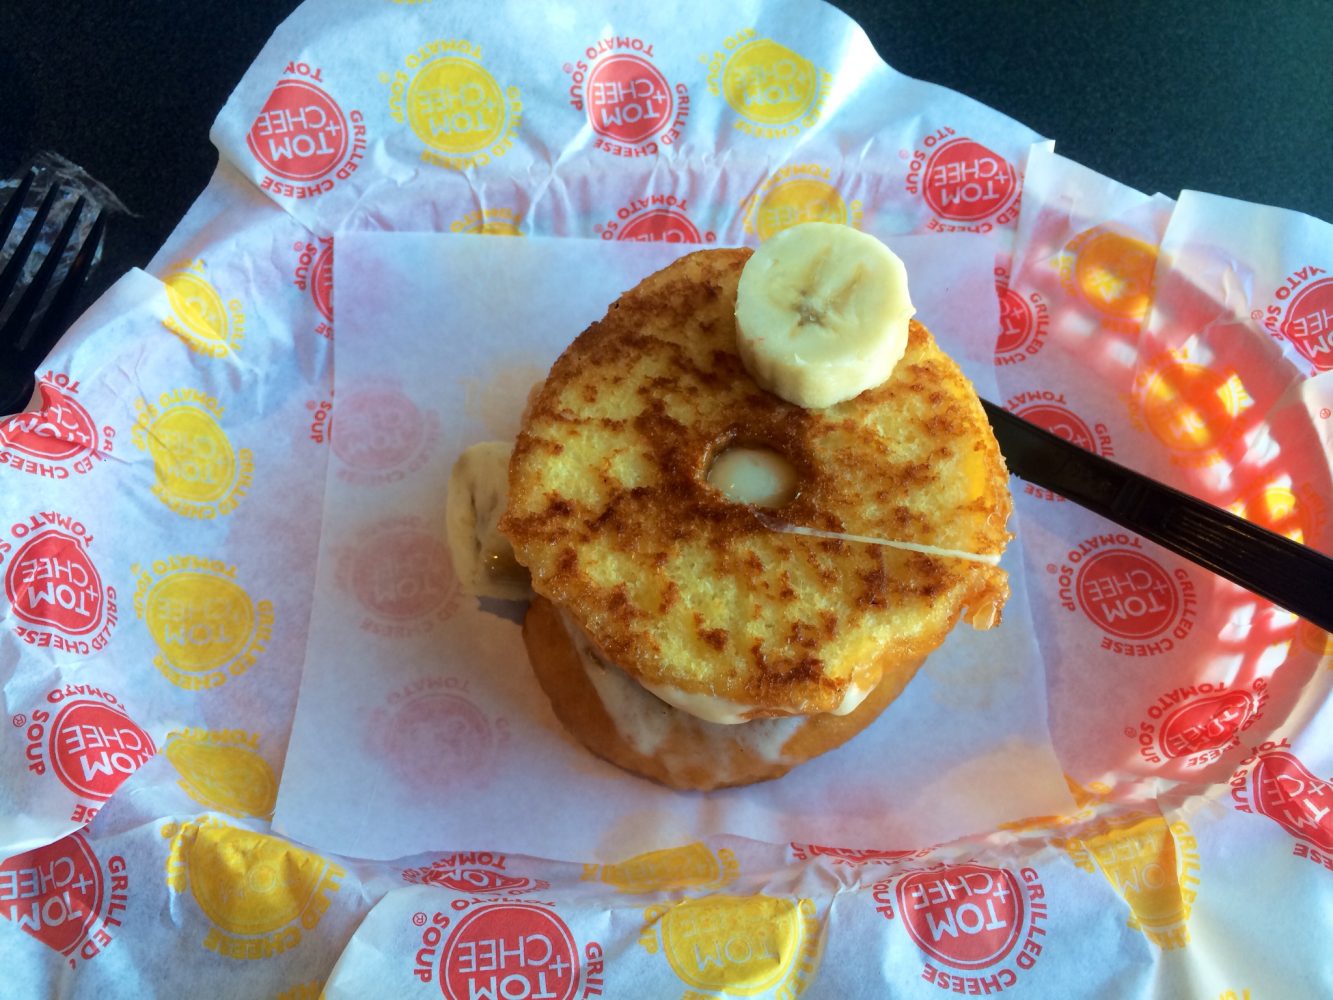 New Tom+Chee location serves up classic combos